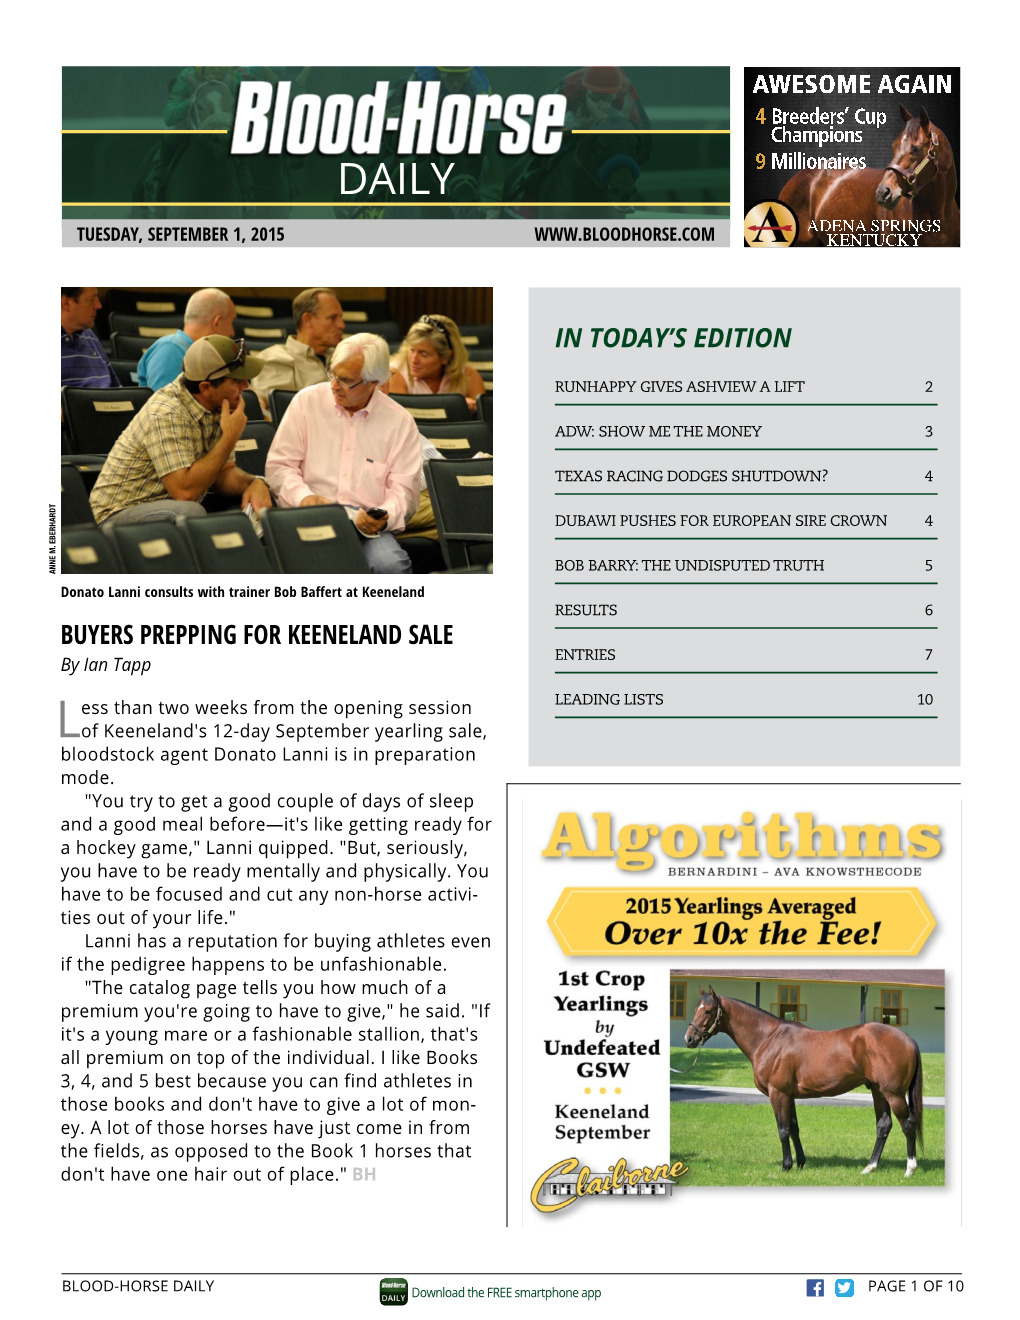 Buyers Prepping for Keeneland Sale in Today's Edition